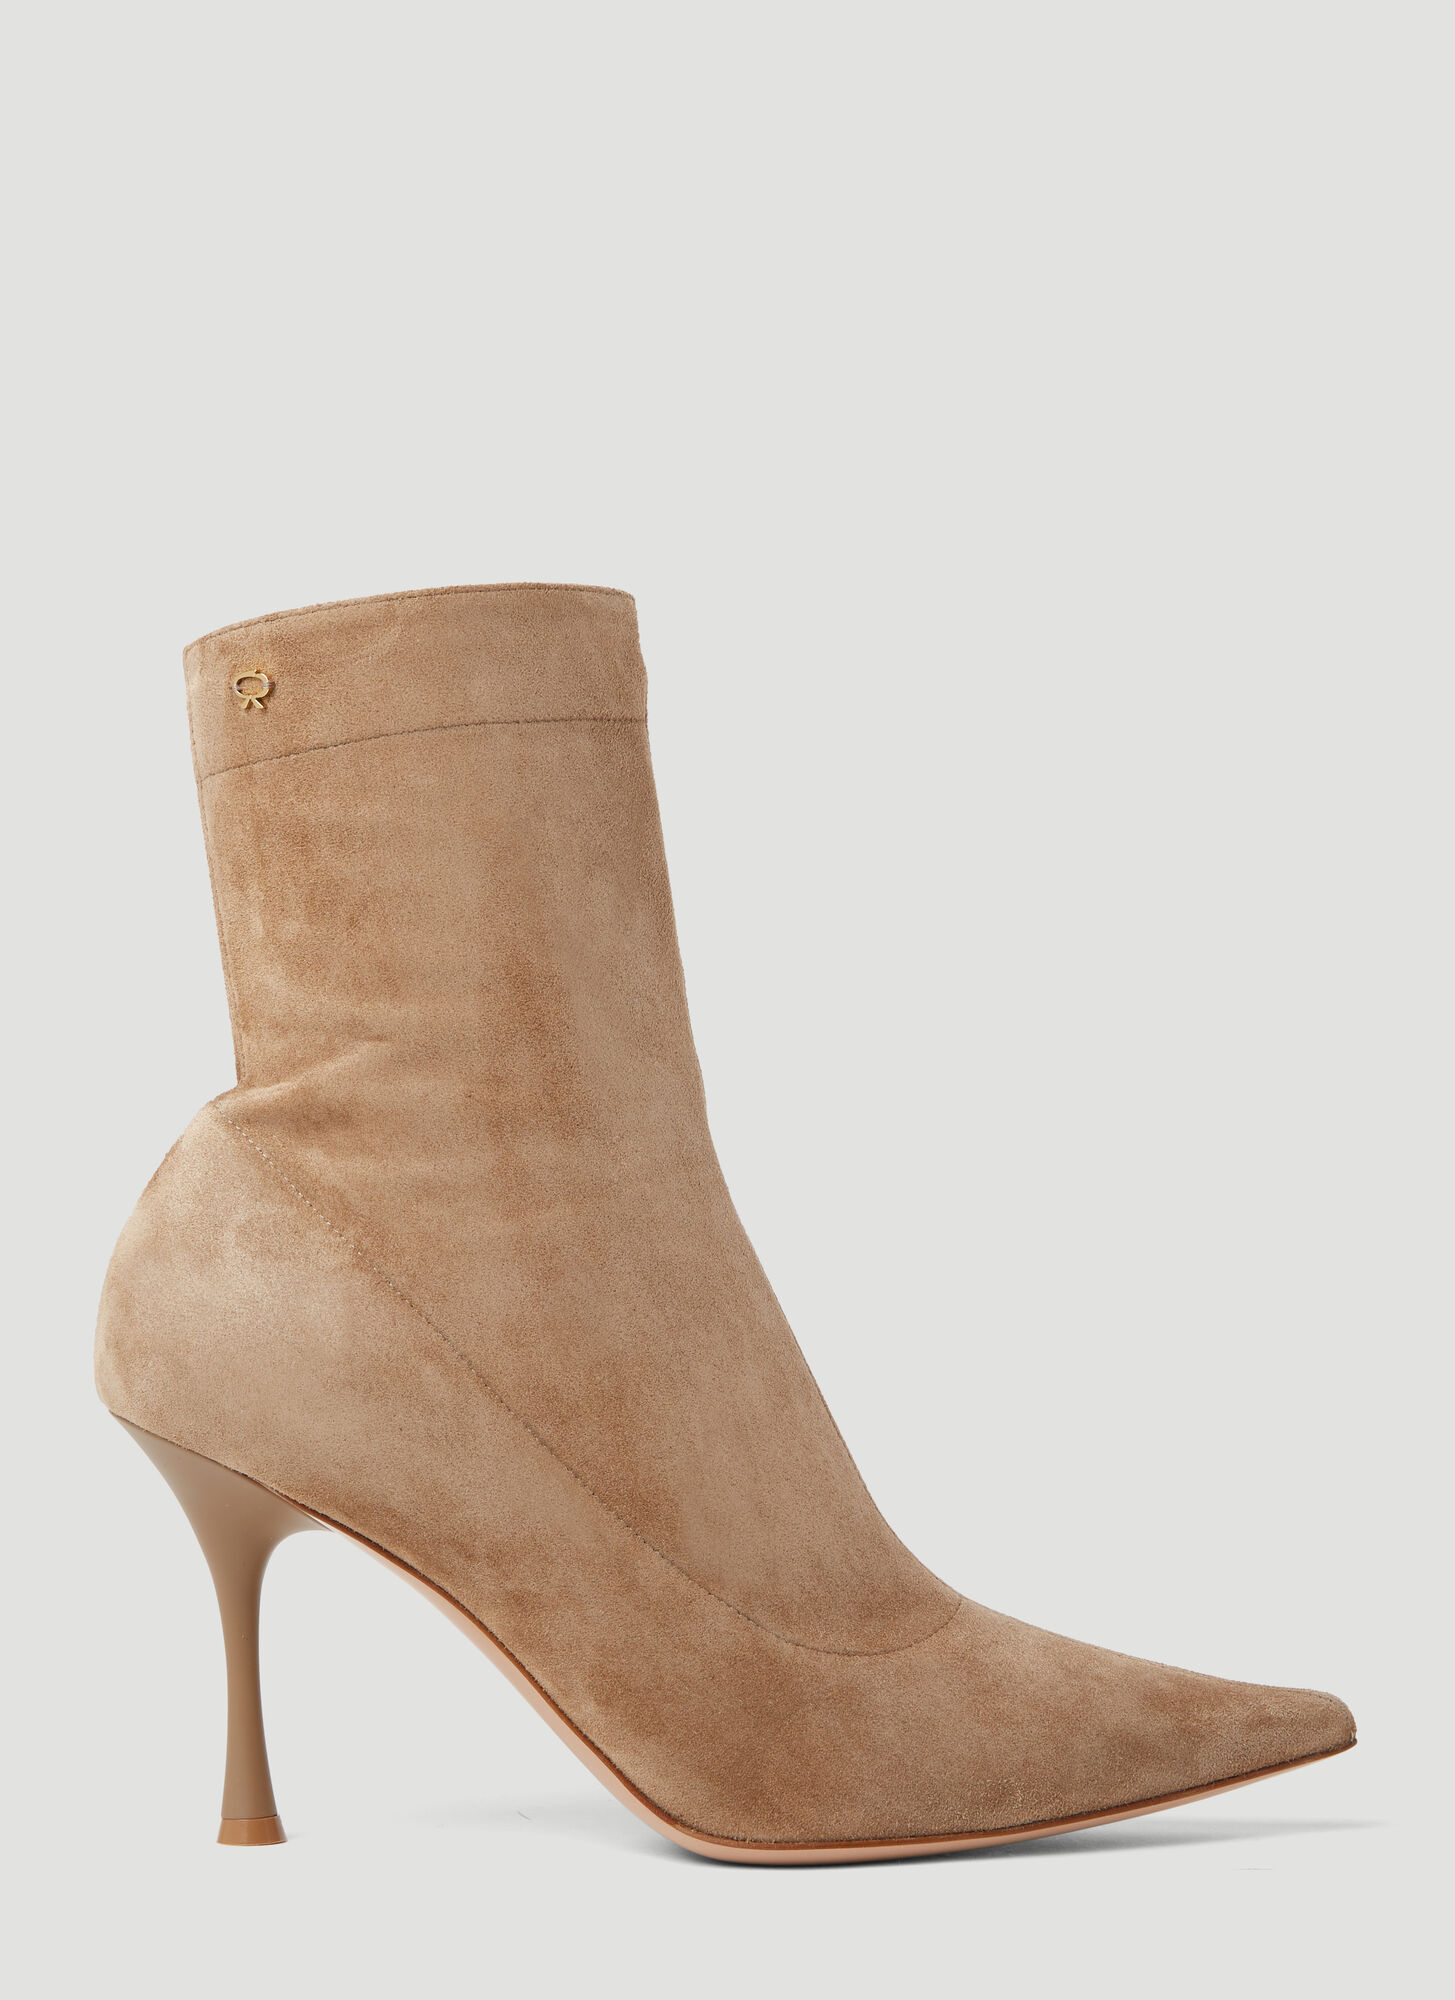 GIANVITO ROSSI DUNN SUEDE HIGH HEEL BOOTS